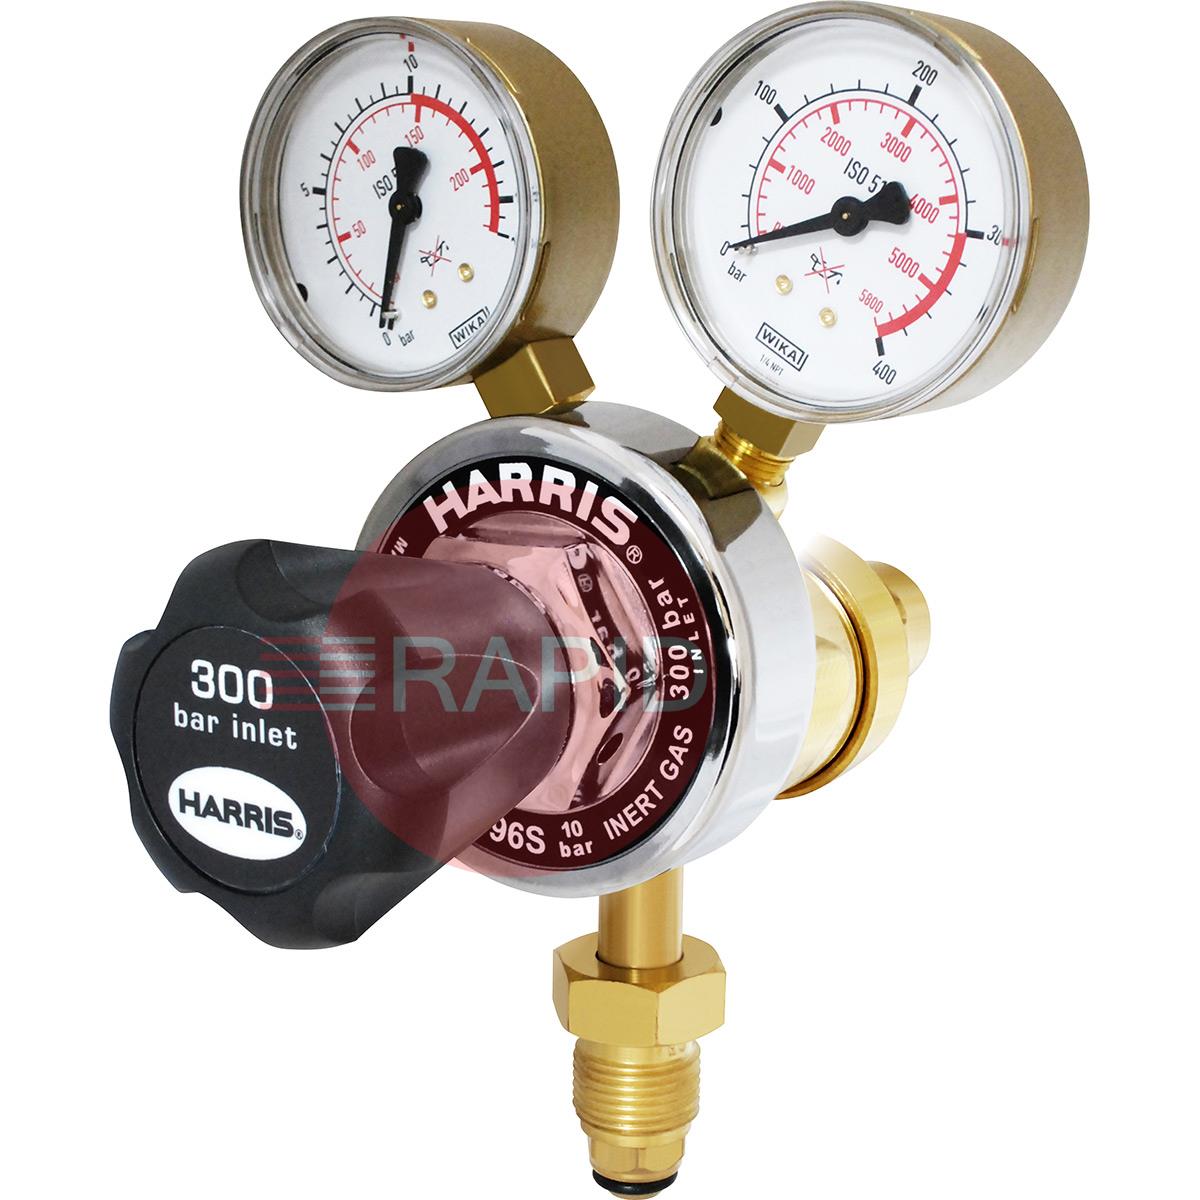 H1048  Harris Inert Gas 996 Two Stage Two Gauge Regulator 10.0 bar, 5/8 BSP RH Cylinder Connection, 3/8 BSP Outlet, UK Fitting Only